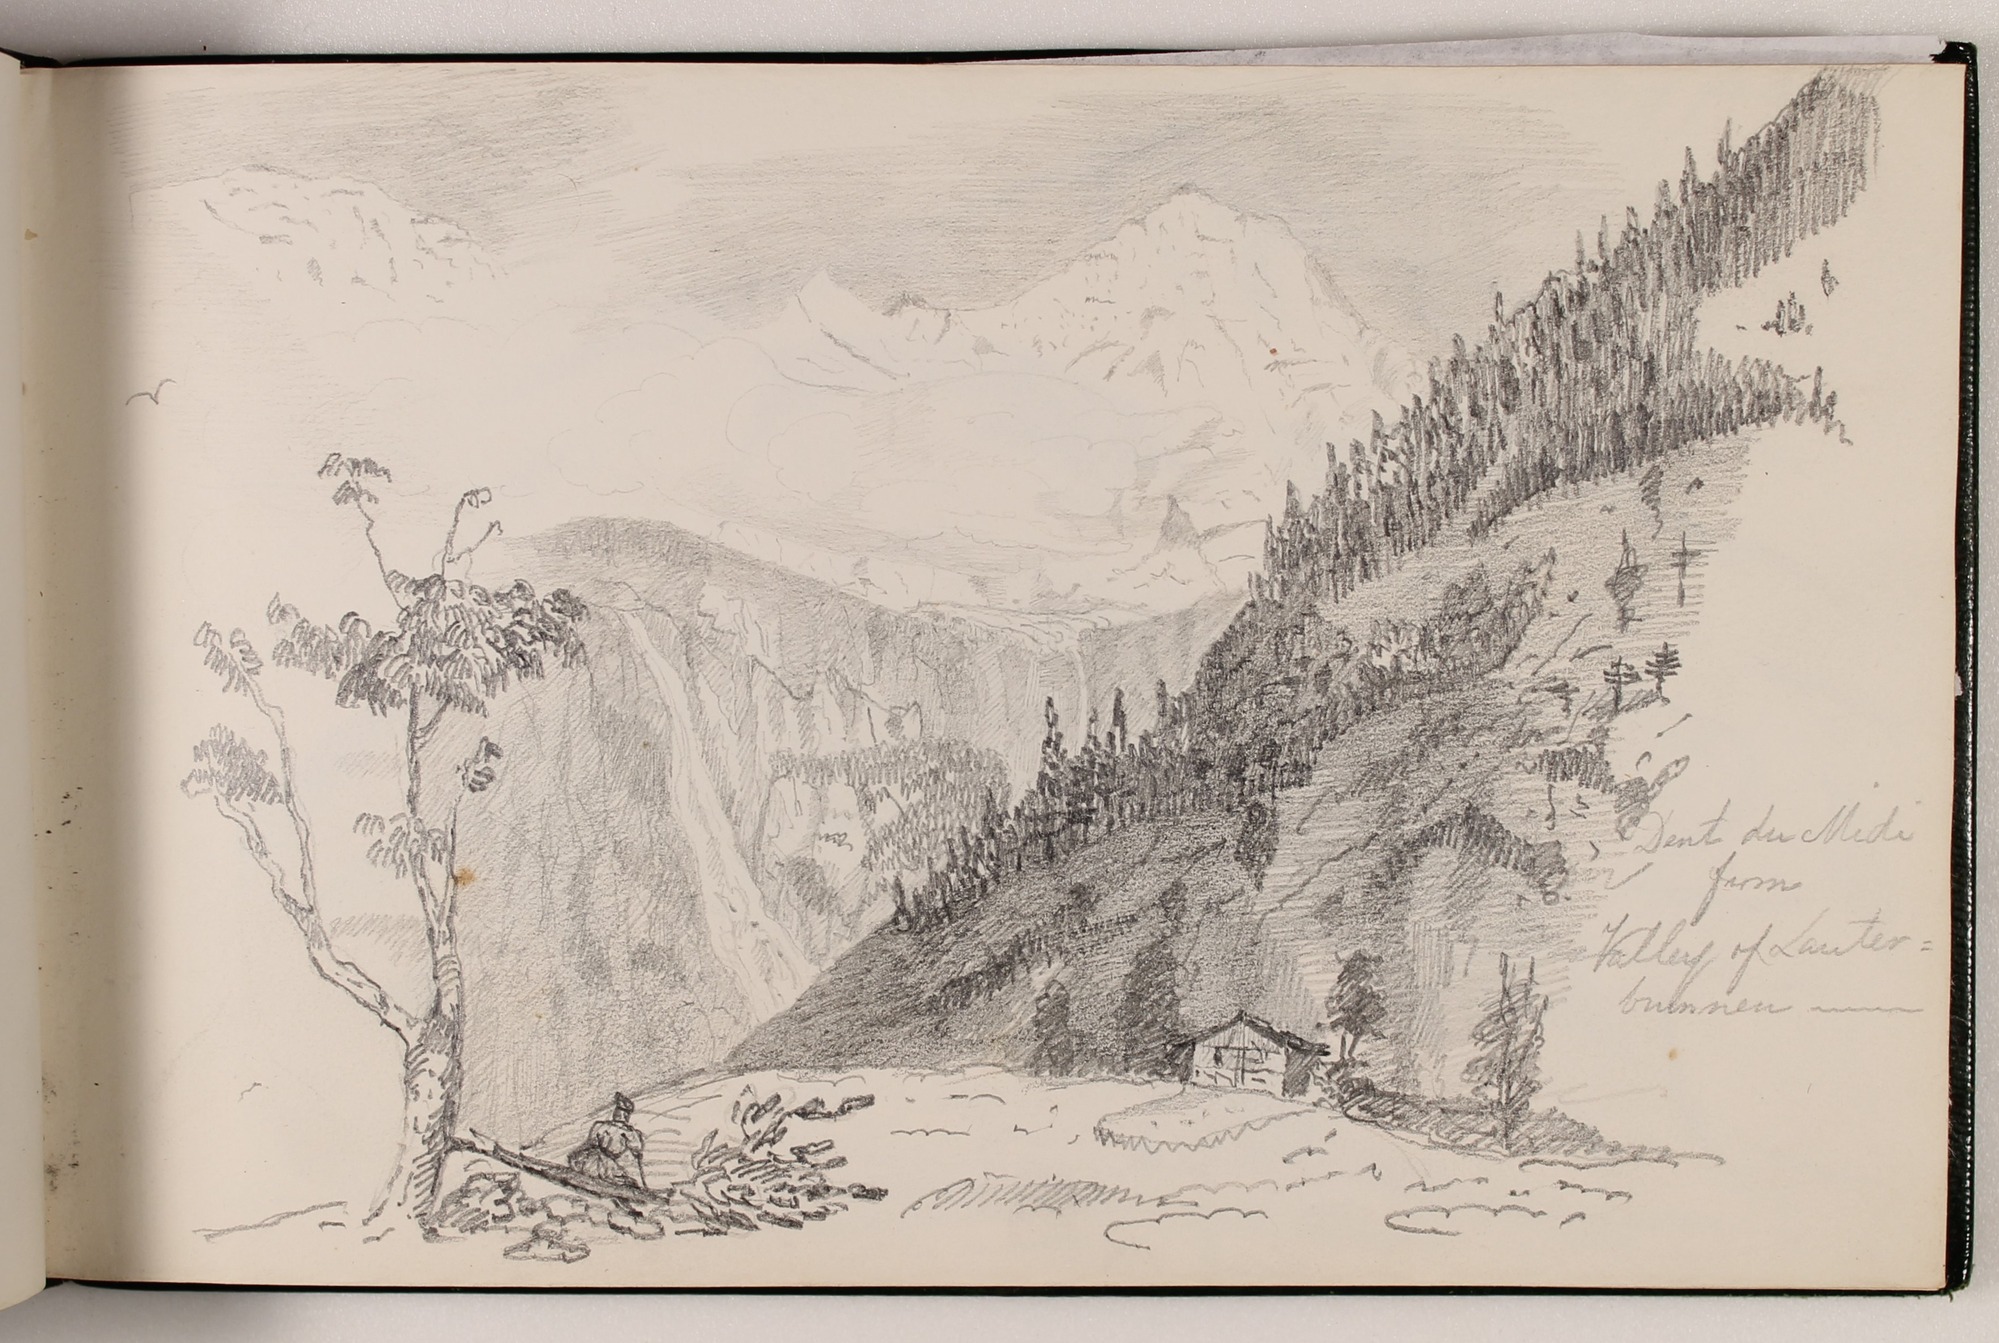 Pencil landscape in sketchbook of a pass between tall mountains.